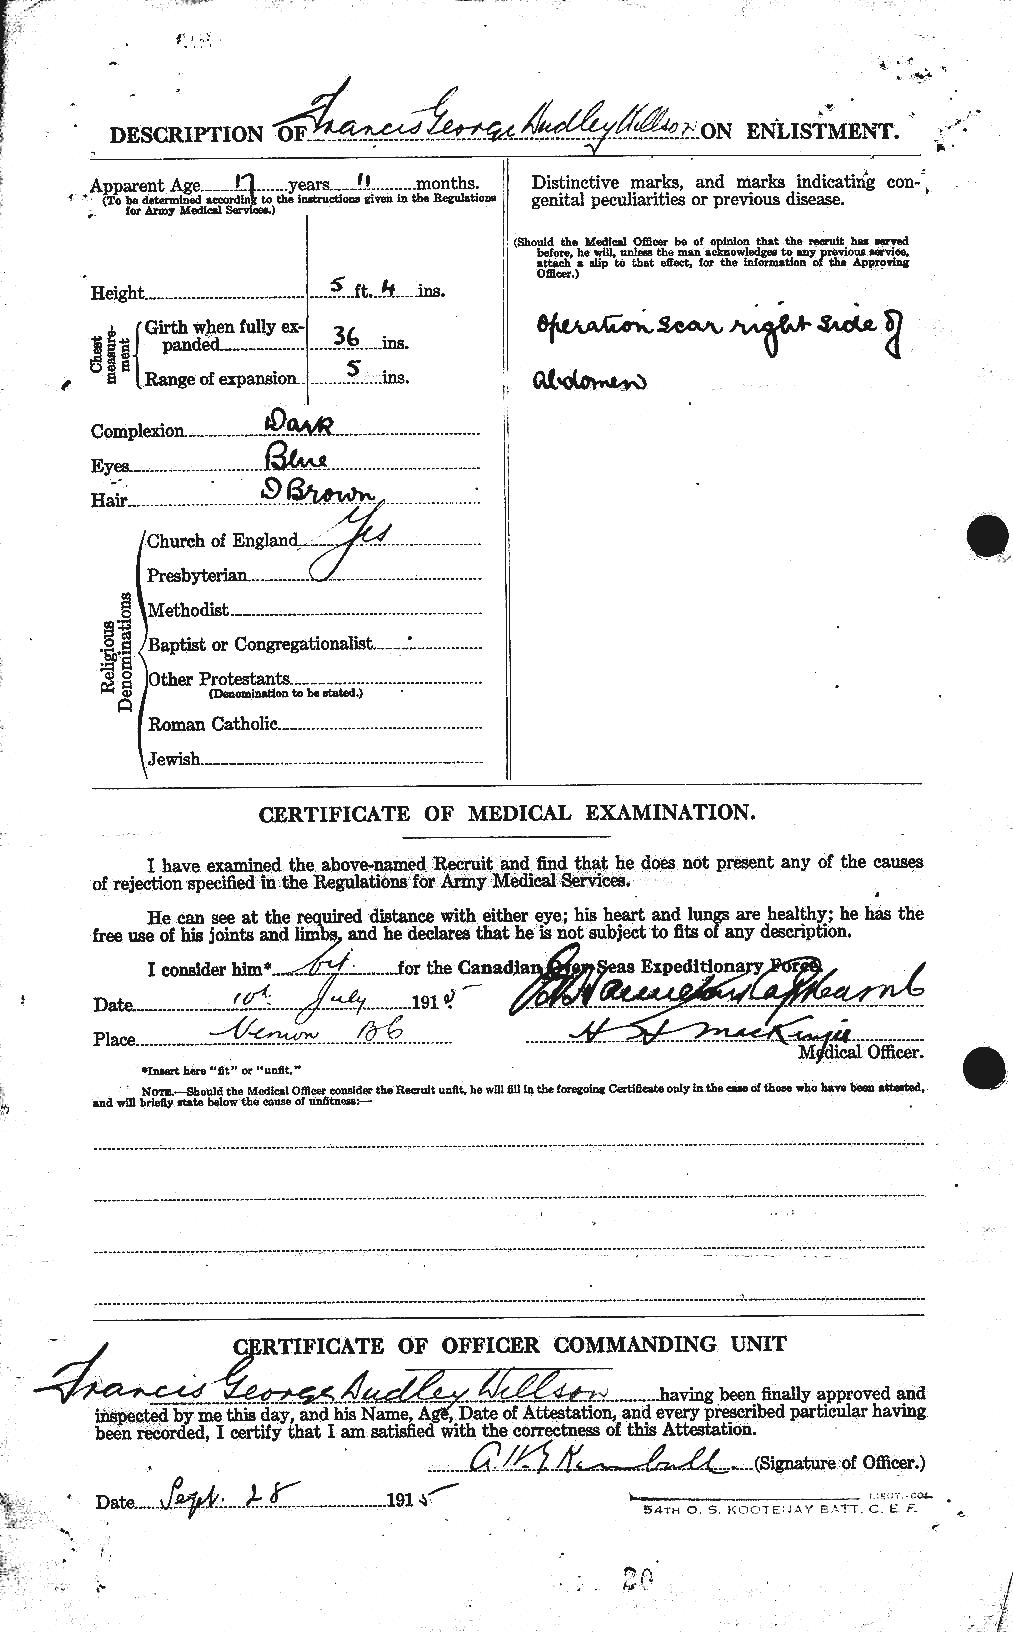 Personnel Records of the First World War - CEF 676961b